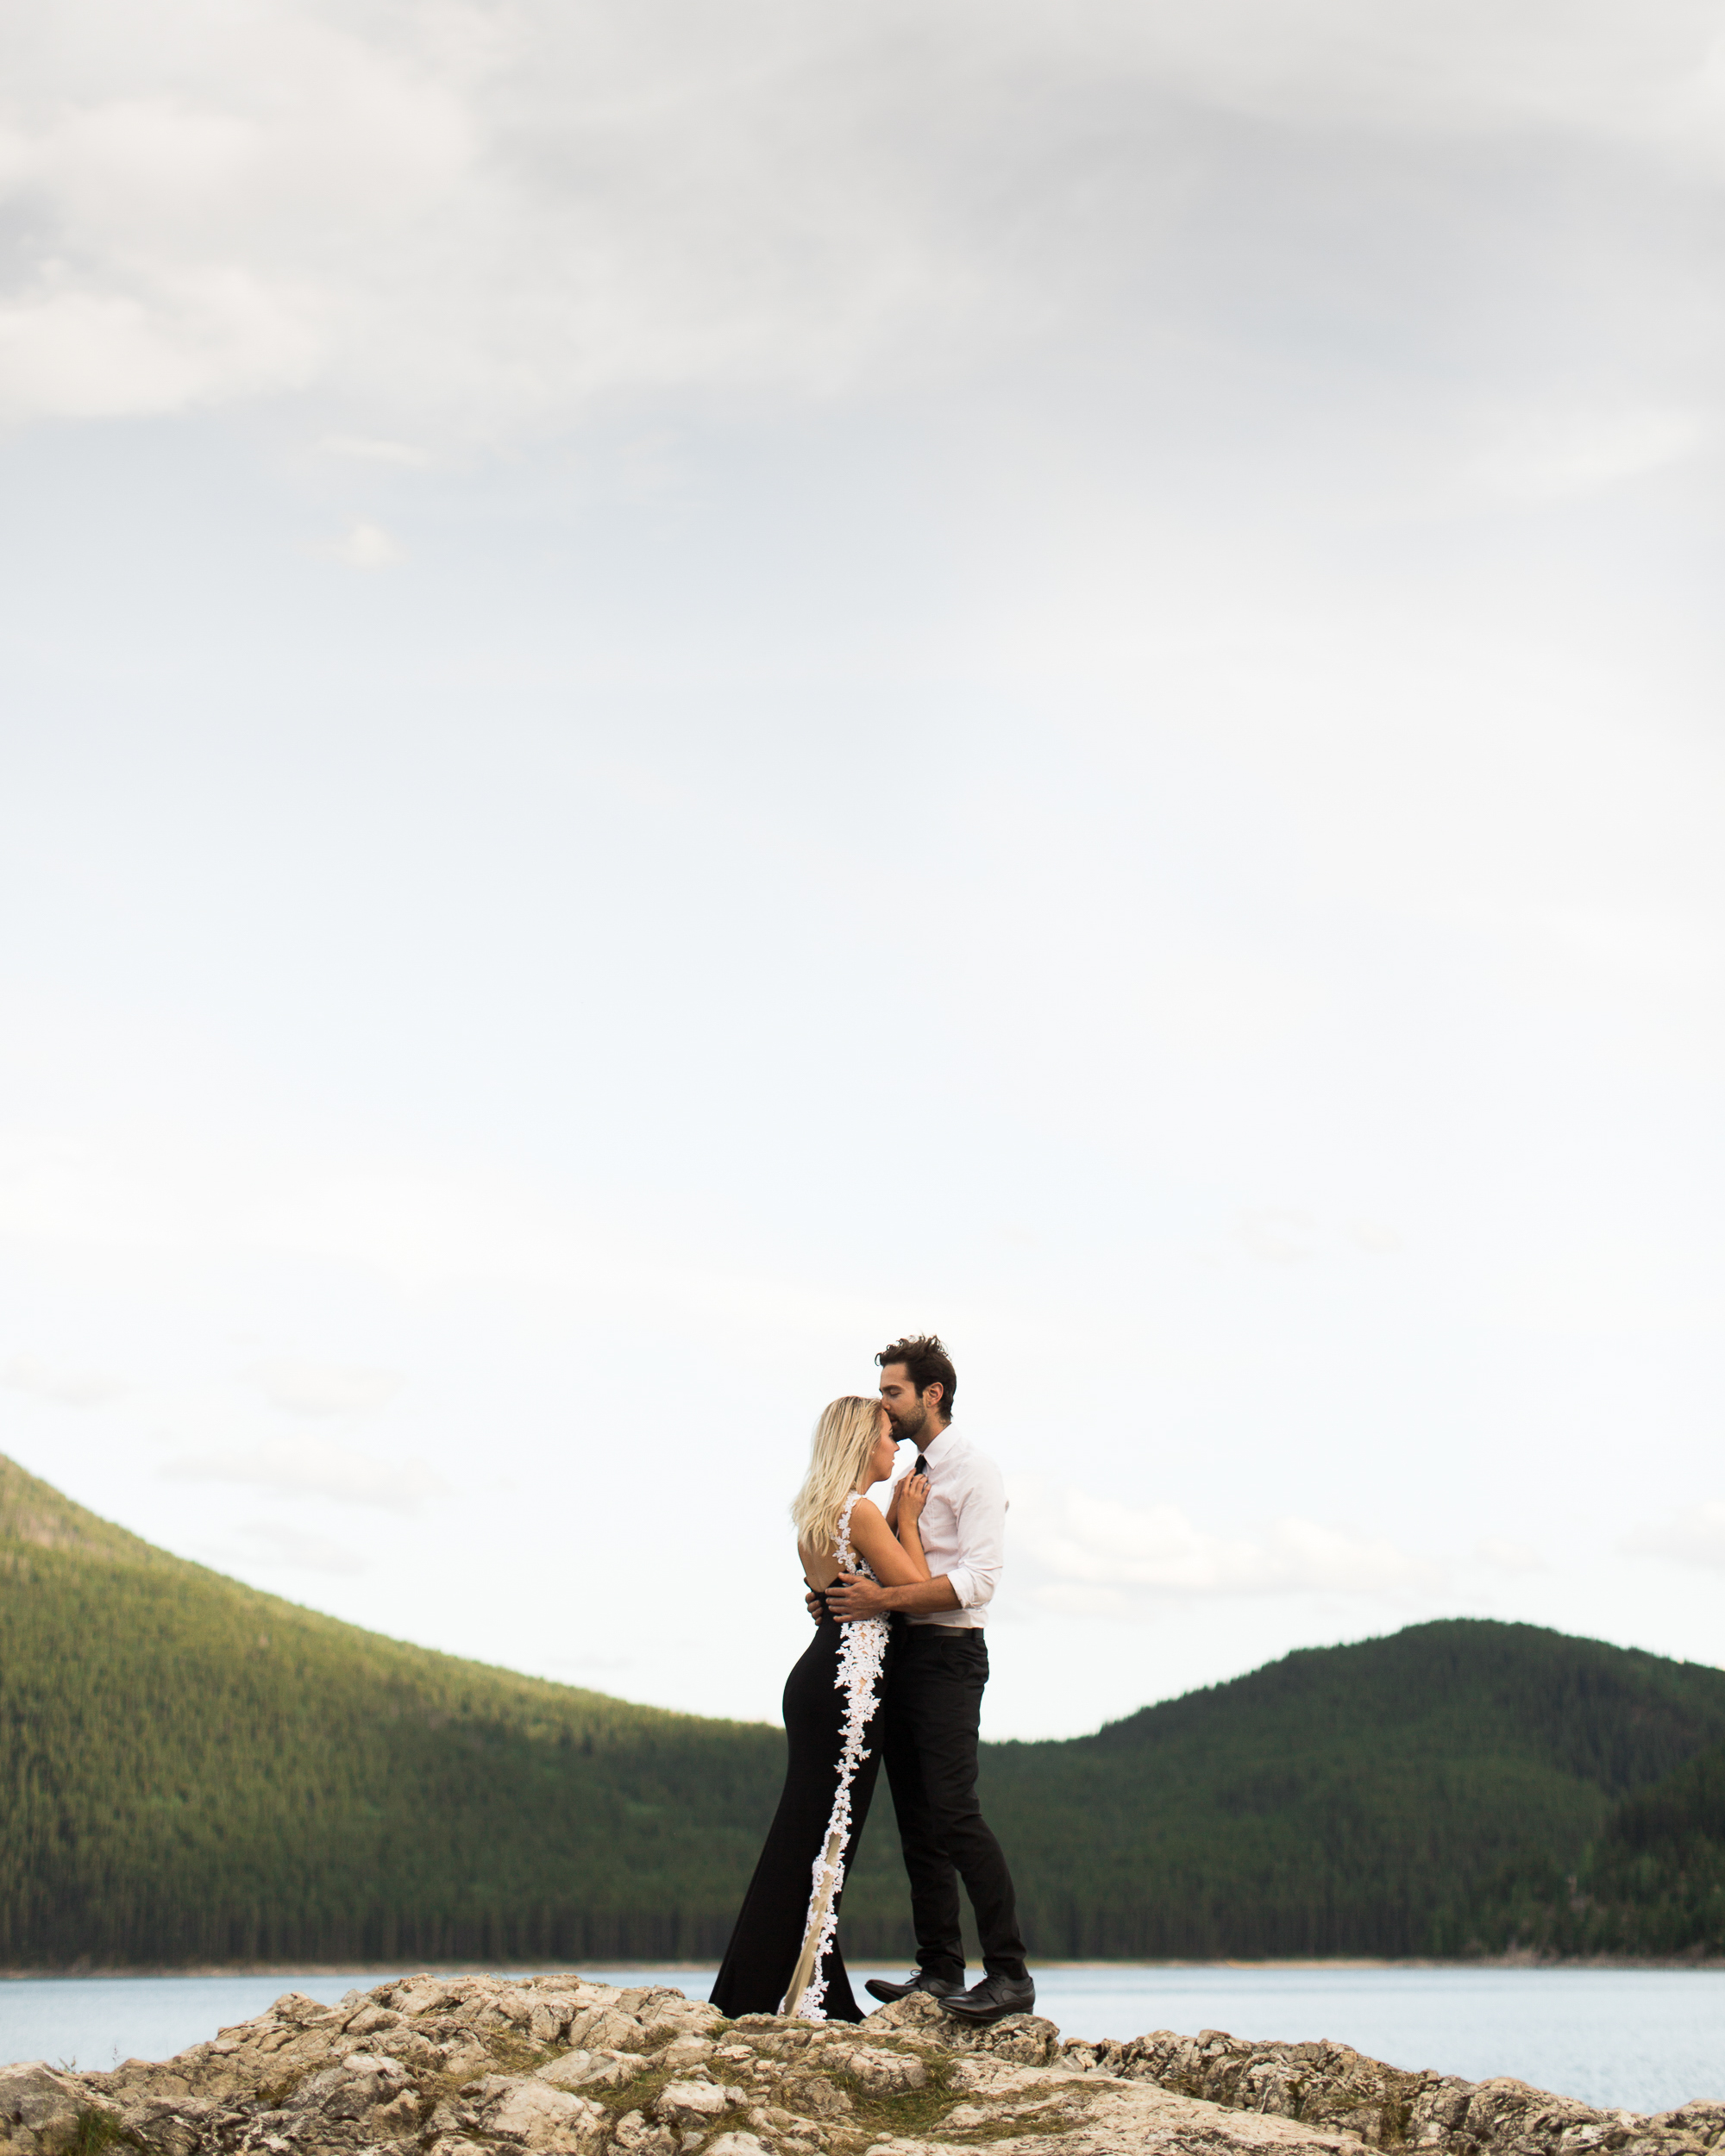 12-Willow_and_Wolf_Photography_Sandra_and_Shawn_Banff_Engagement73-Willow_and_Wolf_Photography_Sandra_and_Shawn_Engagement_Banff_BEC_7929